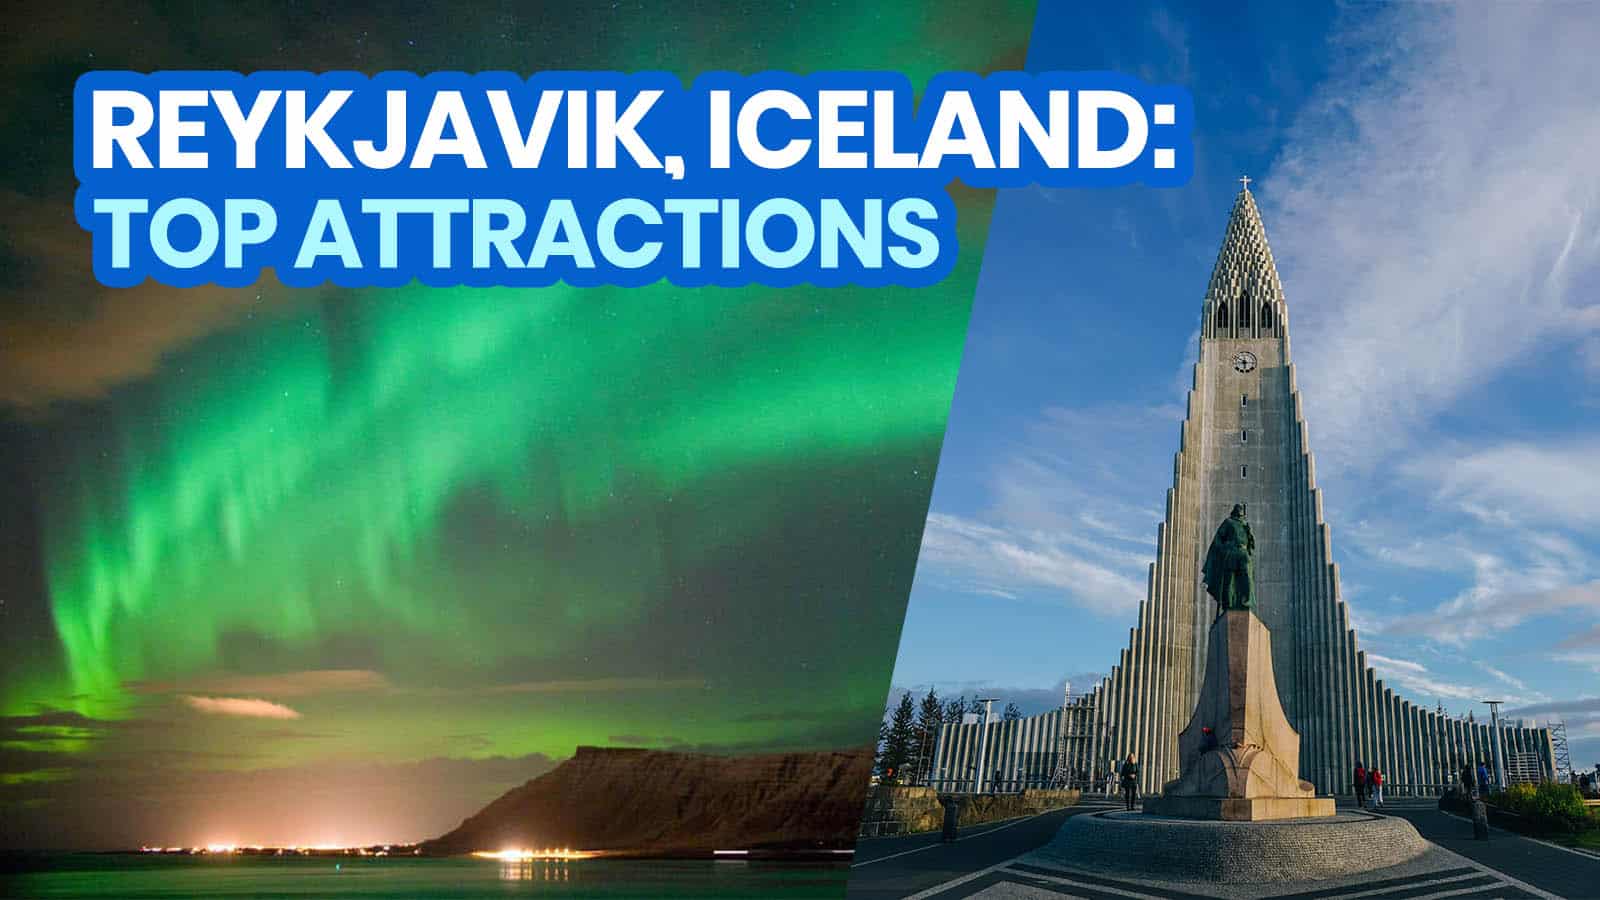 REYKJAVIK: 25 Best Things to Do & Tourist Attractions to Visit